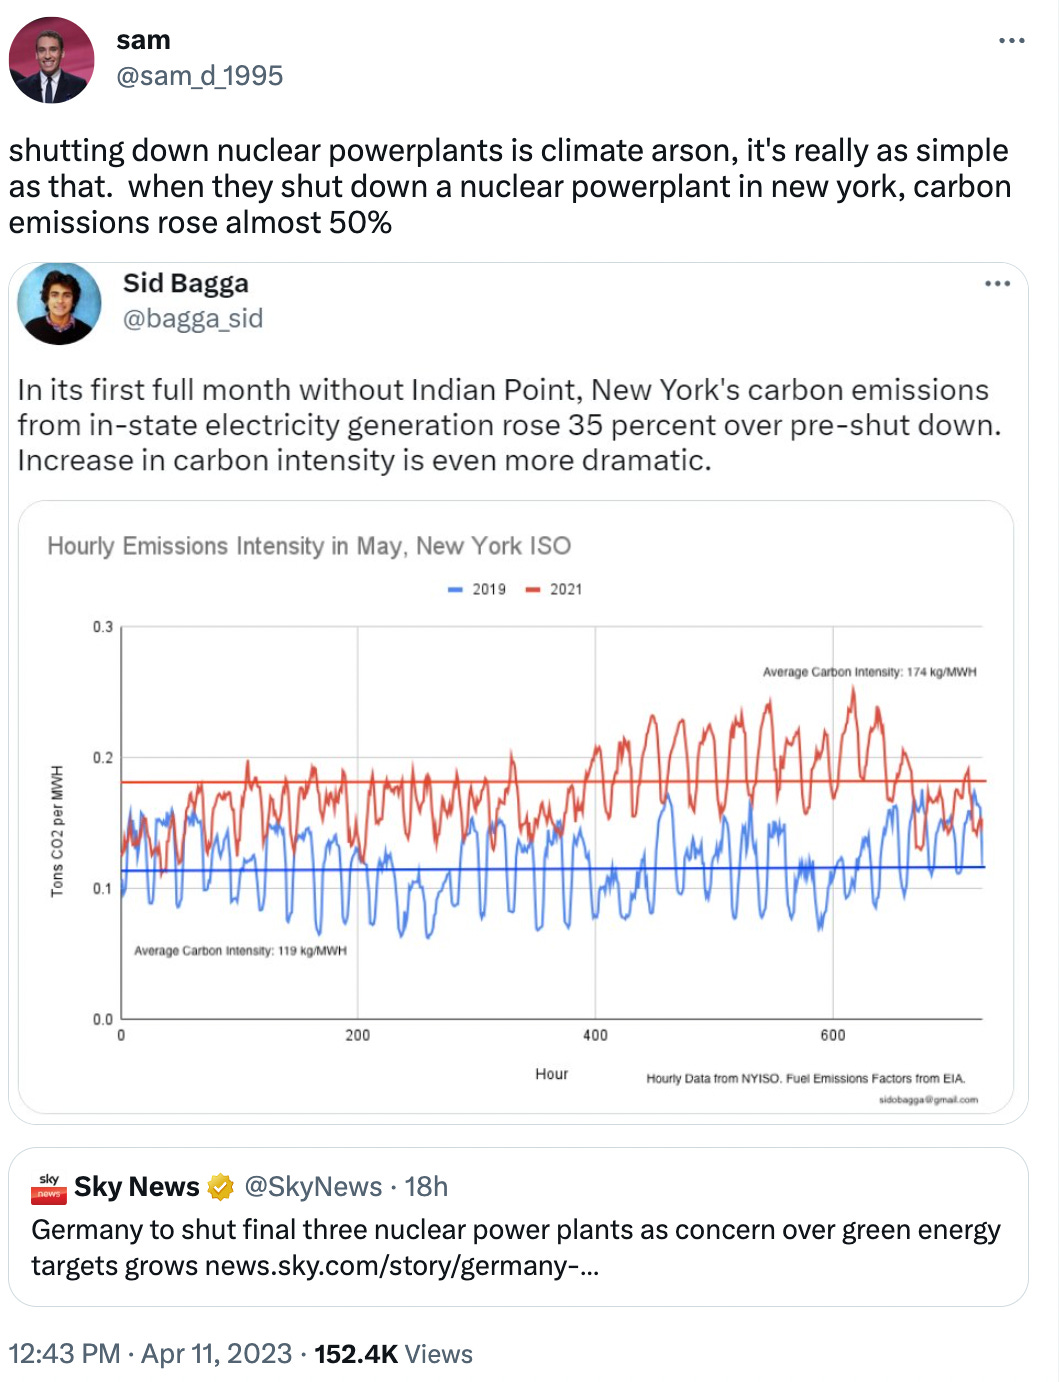 shutting down nuclear powerplants is climate arson, it's really as simple as that.  when they shut down a nuclear powerplant in new york, carbon emissions rose almost 50% Quote Tweet Sky News @SkyNews · 18h Germany to shut final three nuclear power plants as concern over green energy targets grows http://news.sky.com/story/germany-to-shut-final-three-nuclear-power-plants-as-concern-over-green-energy-targets-grows-12854958